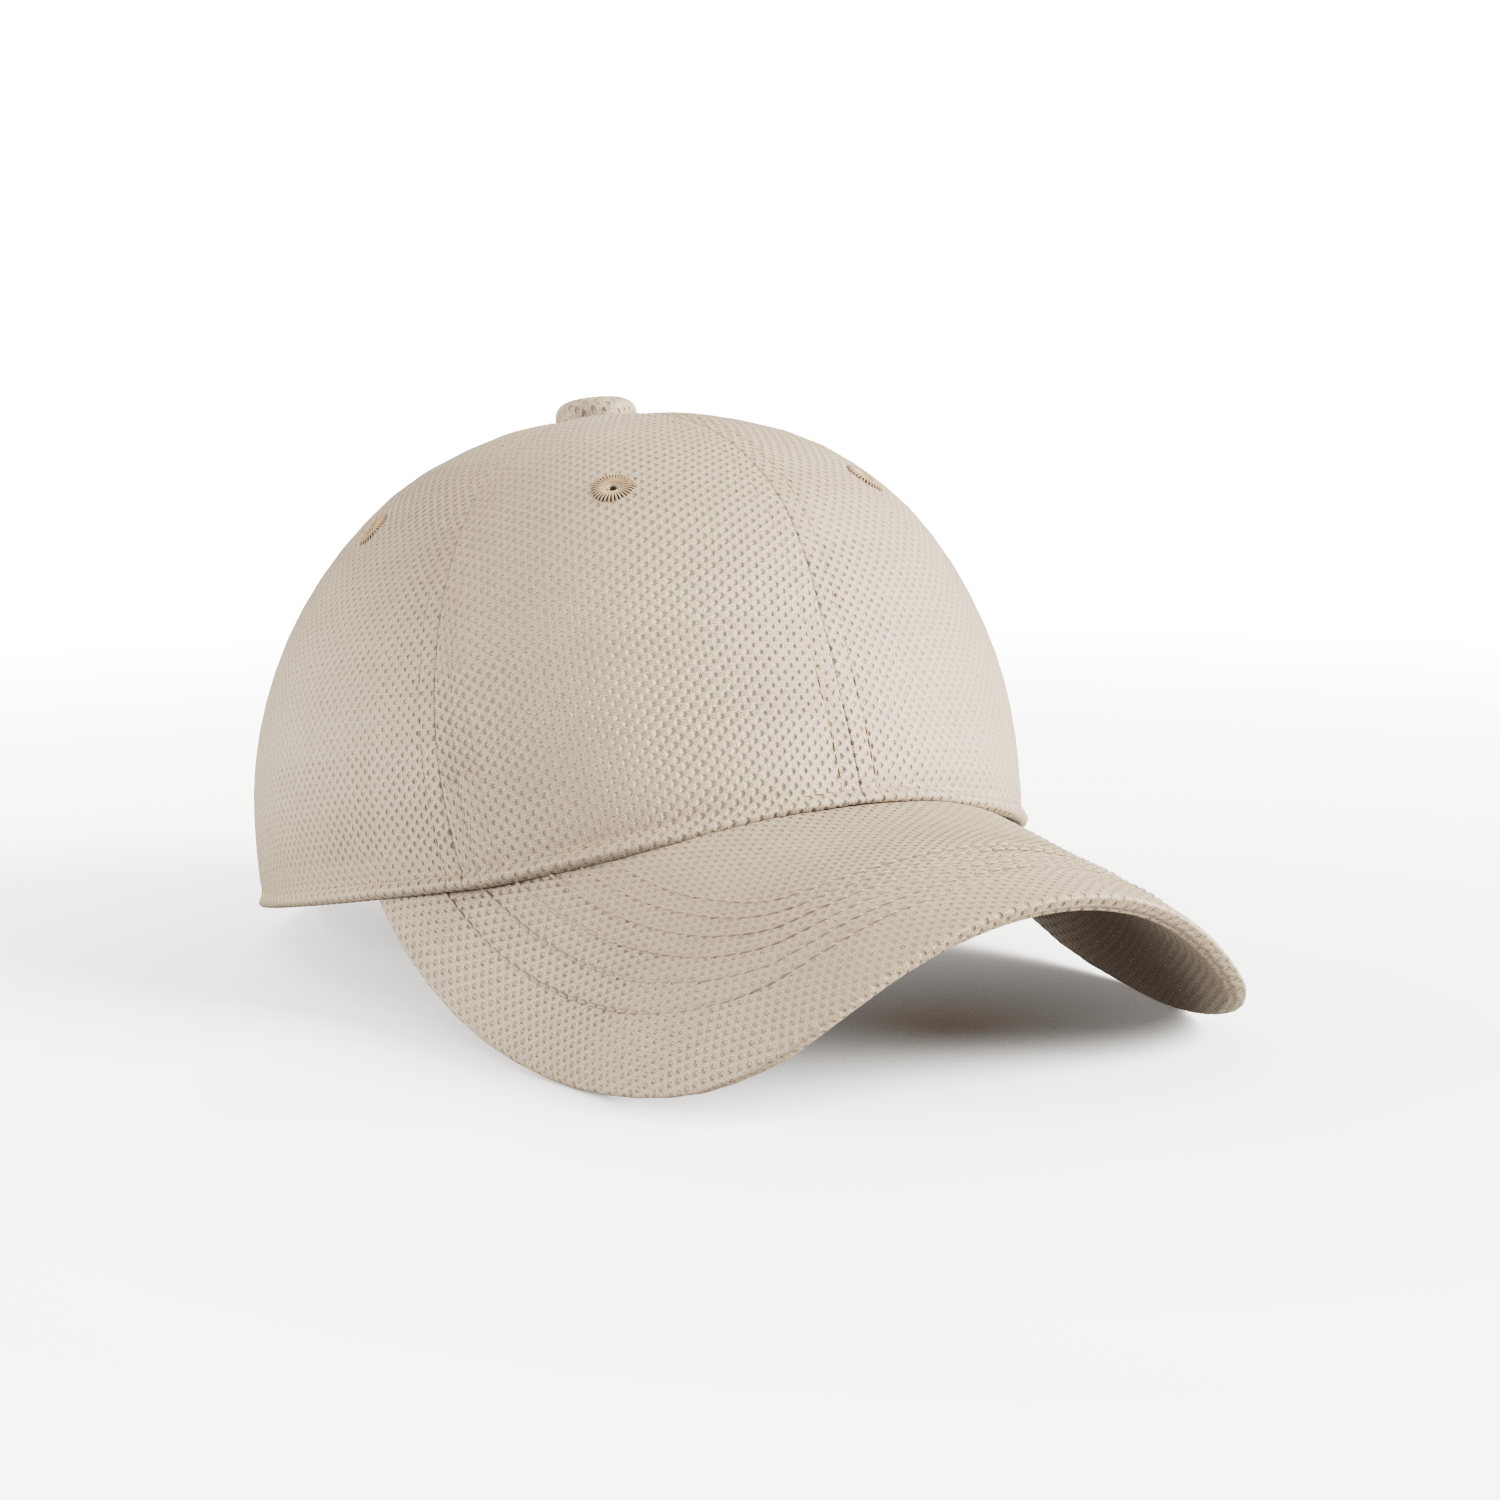 Anywhere There's Grass Hat, 5-Panel